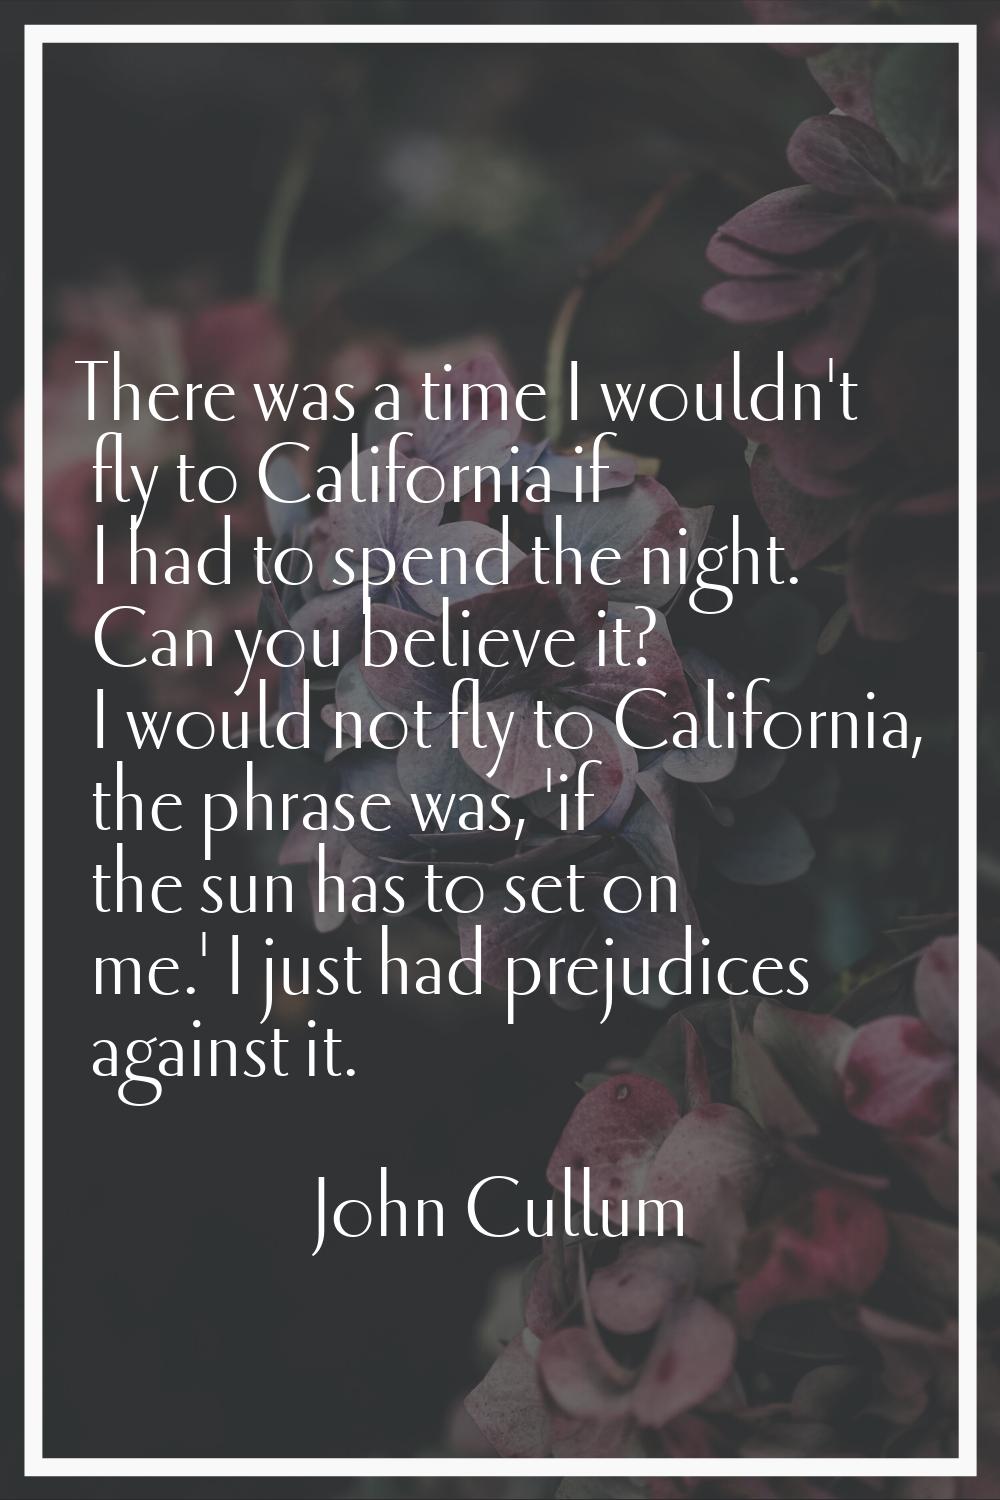 There was a time I wouldn't fly to California if I had to spend the night. Can you believe it? I wo